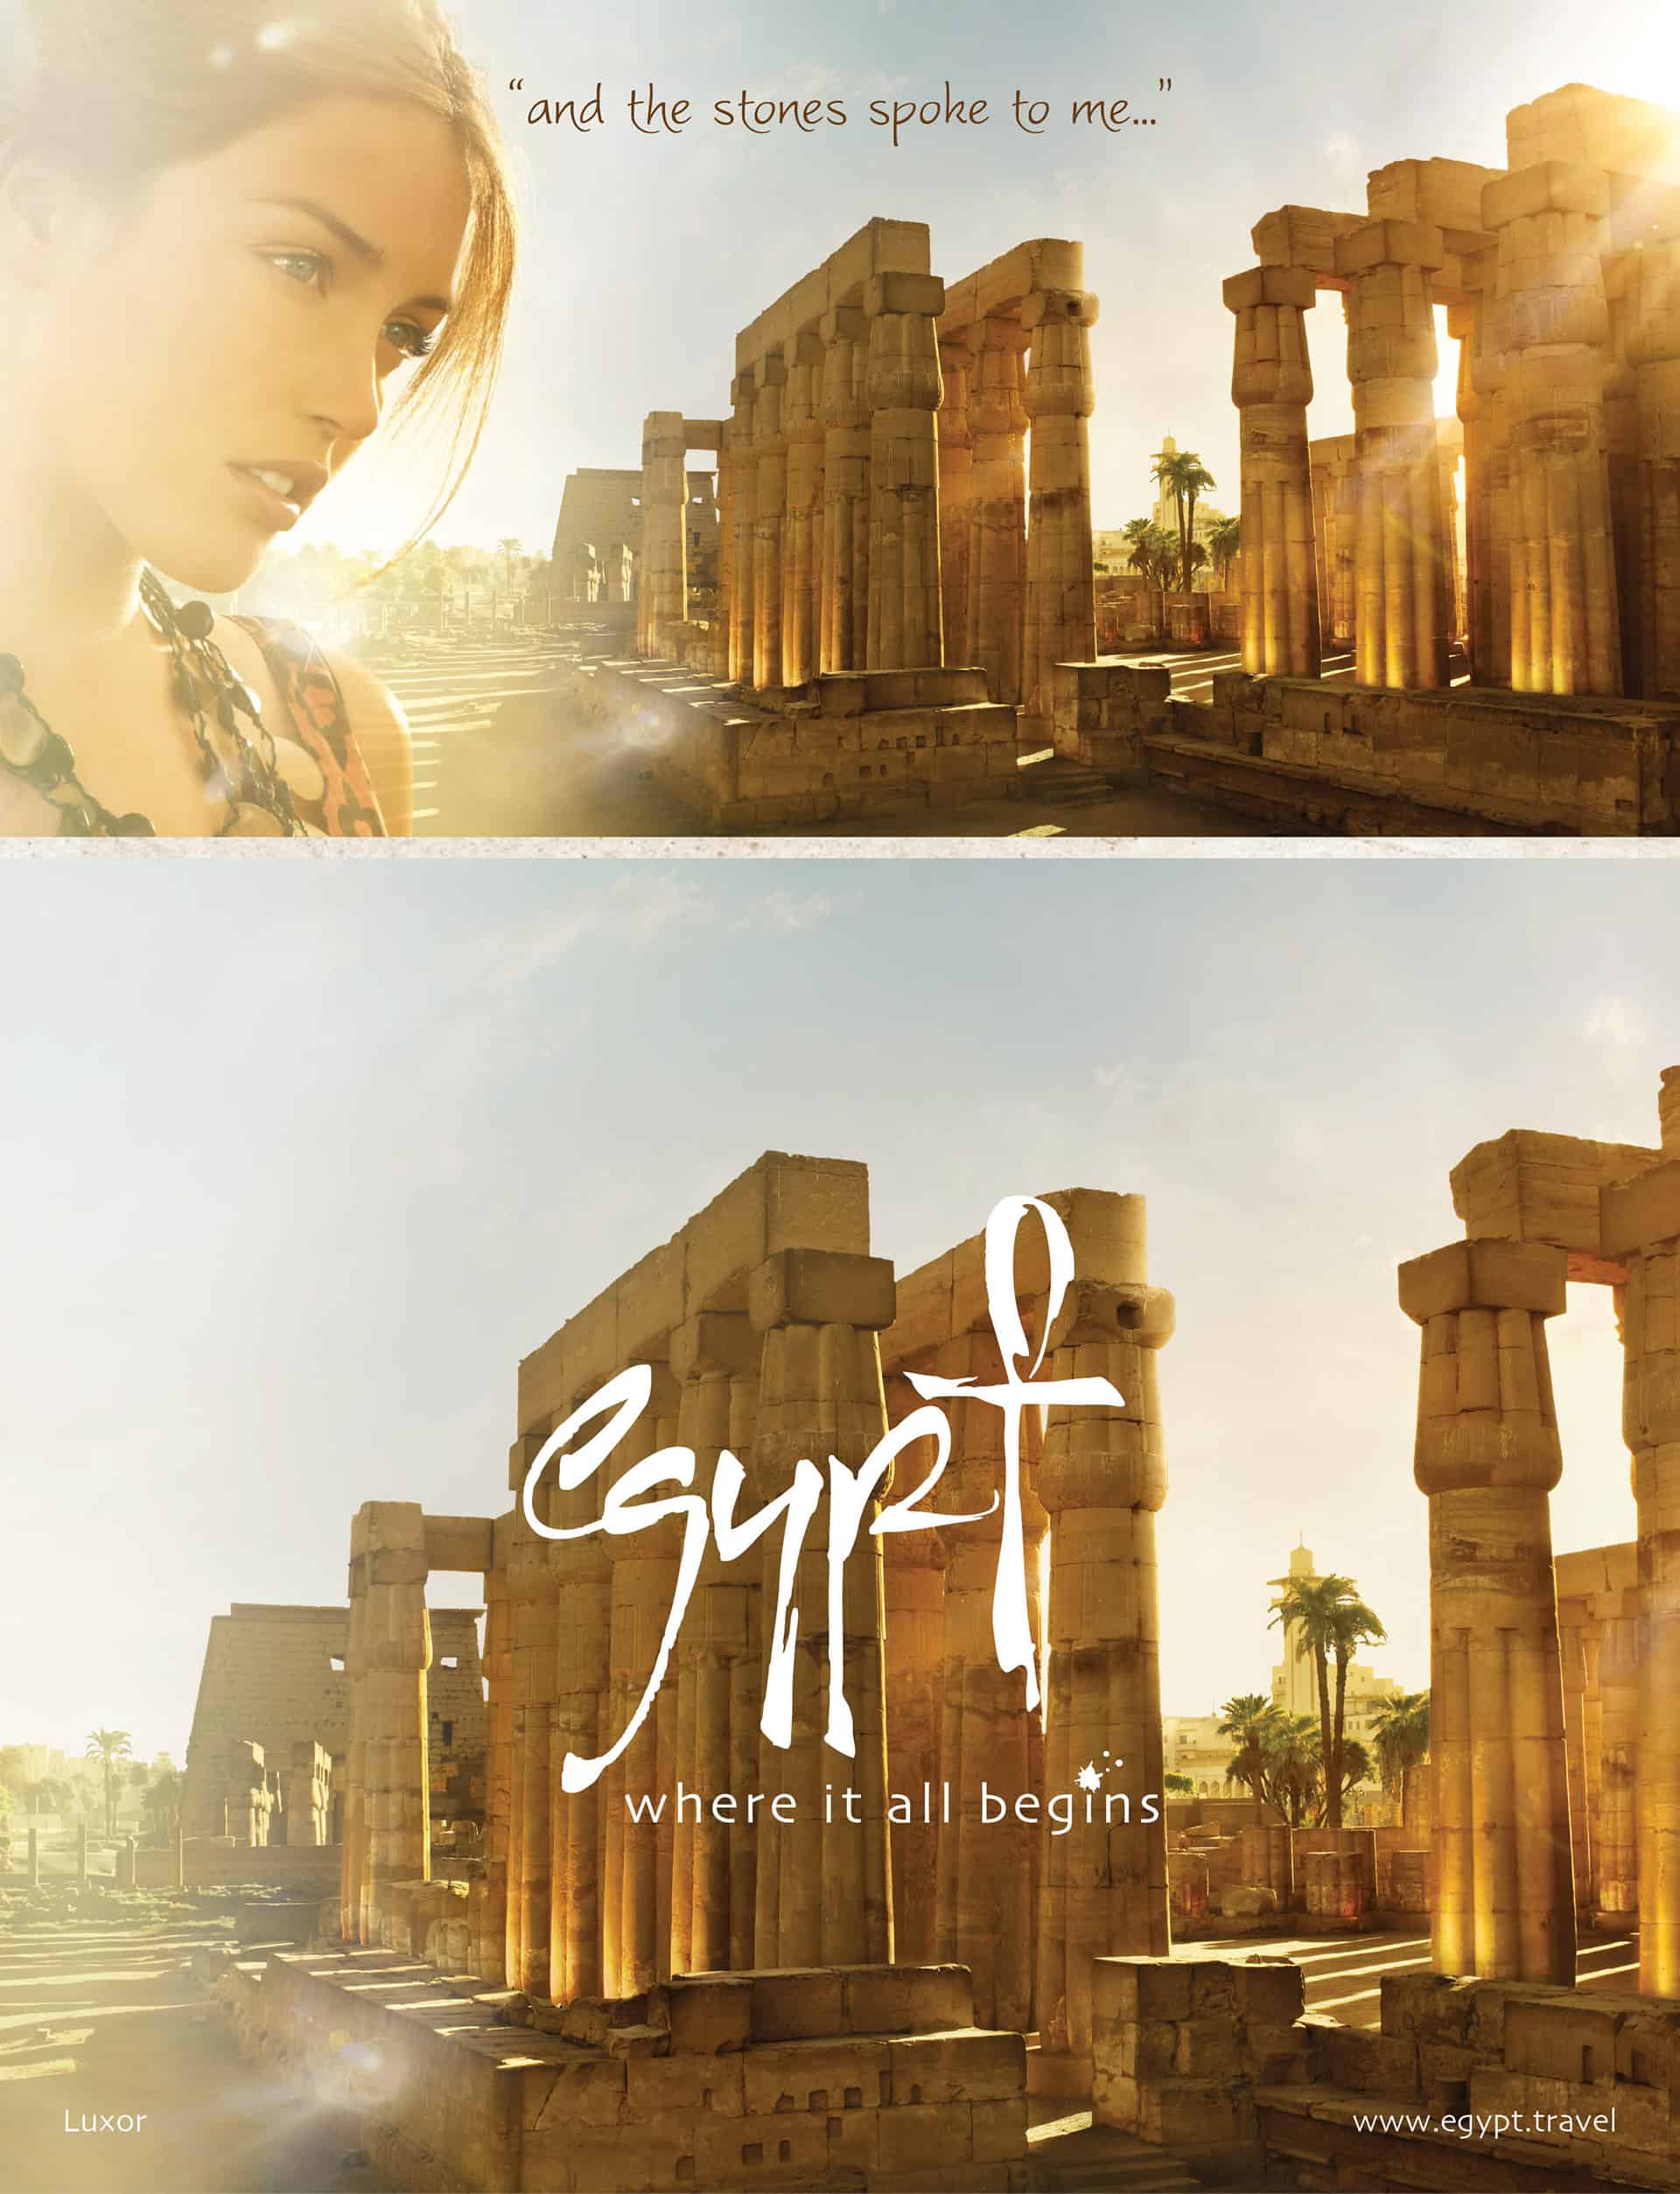 tourism office of egypt